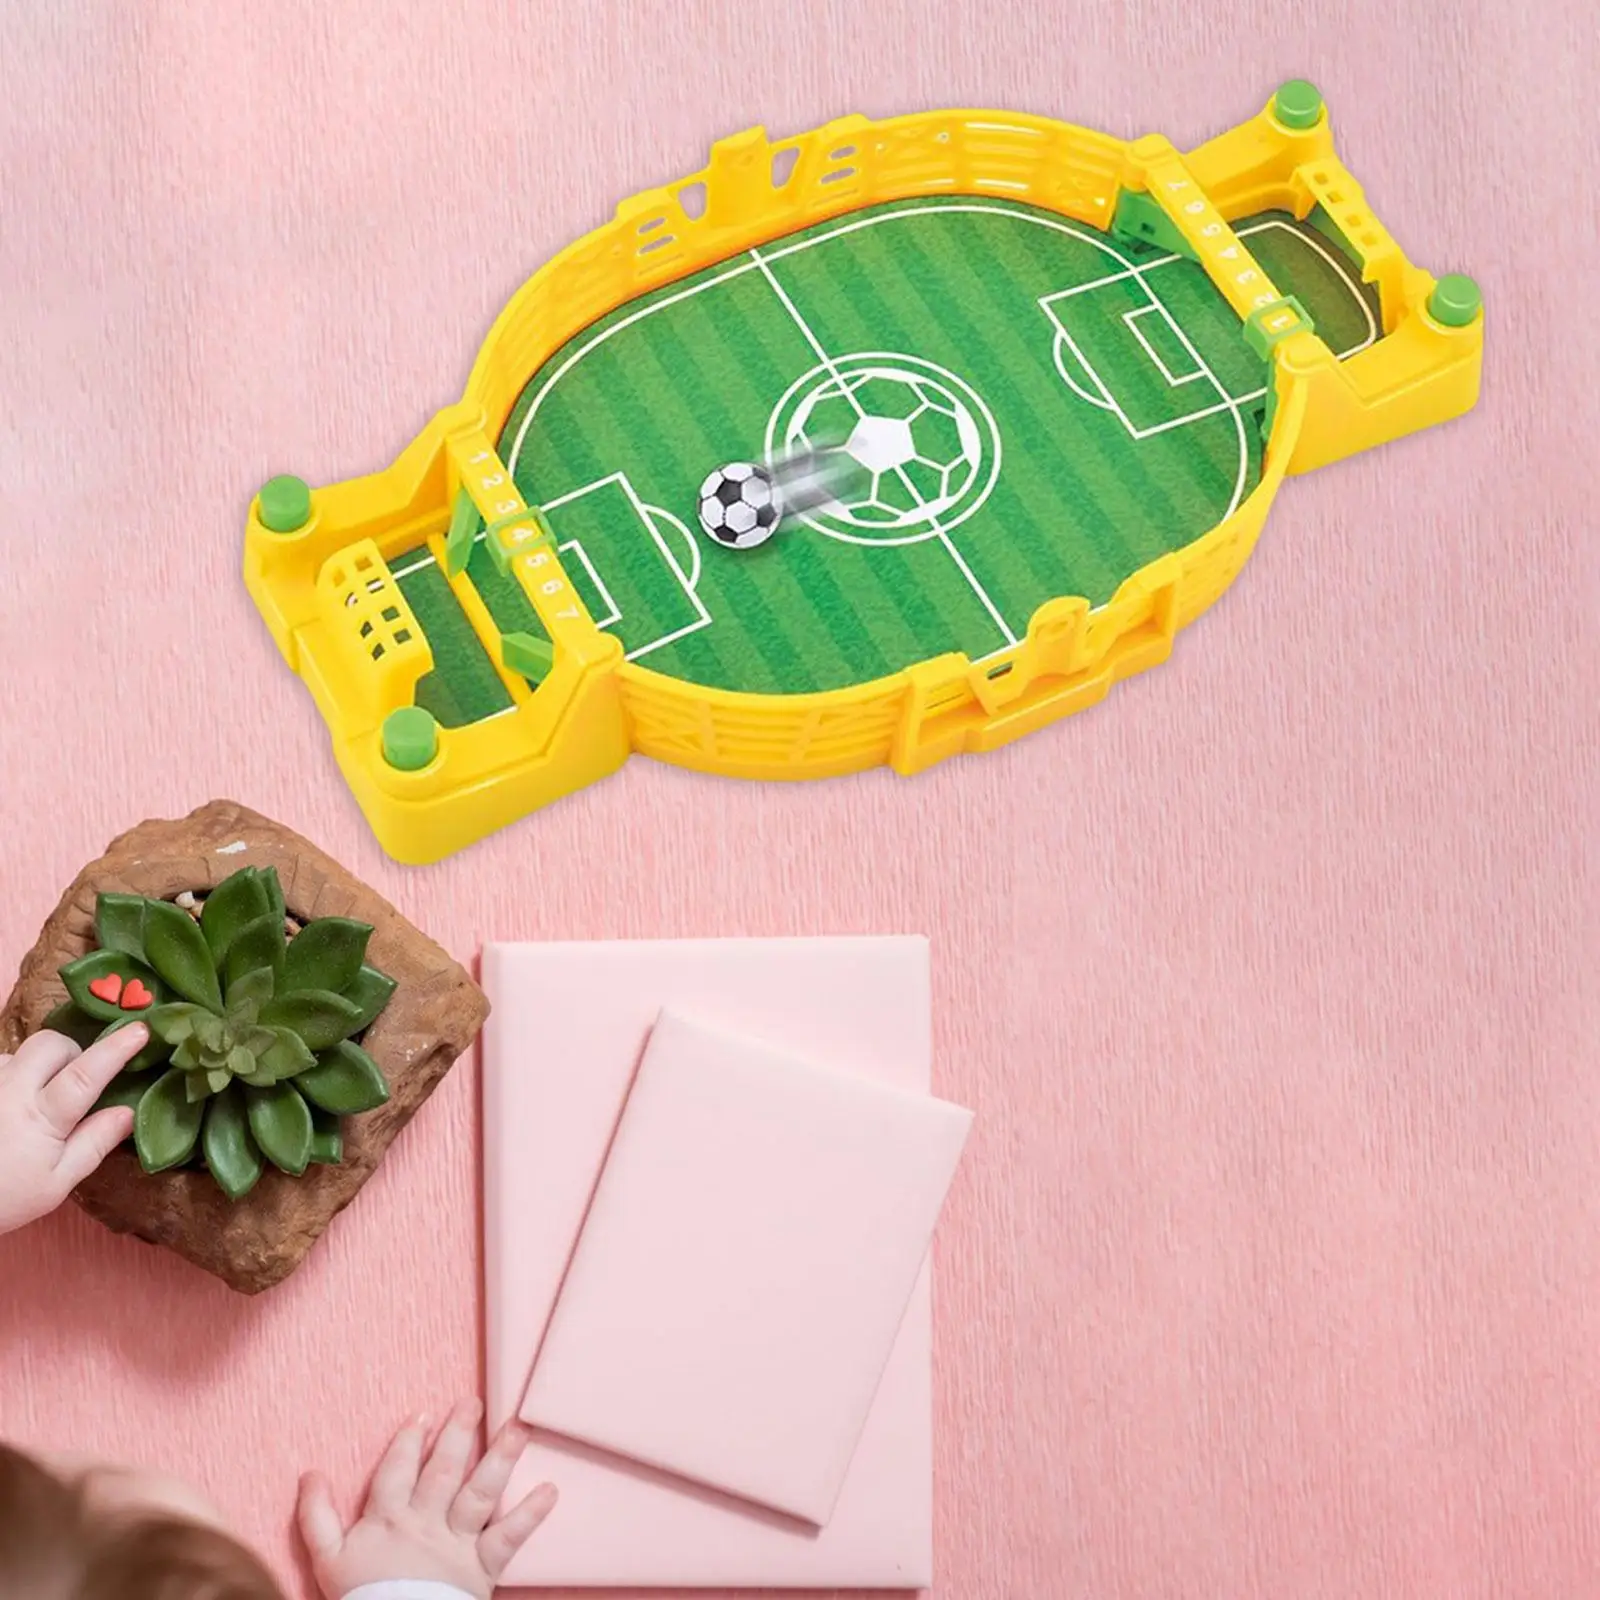 Table Board Football Game Interactive Toy Indoor Funny Football Game Adults